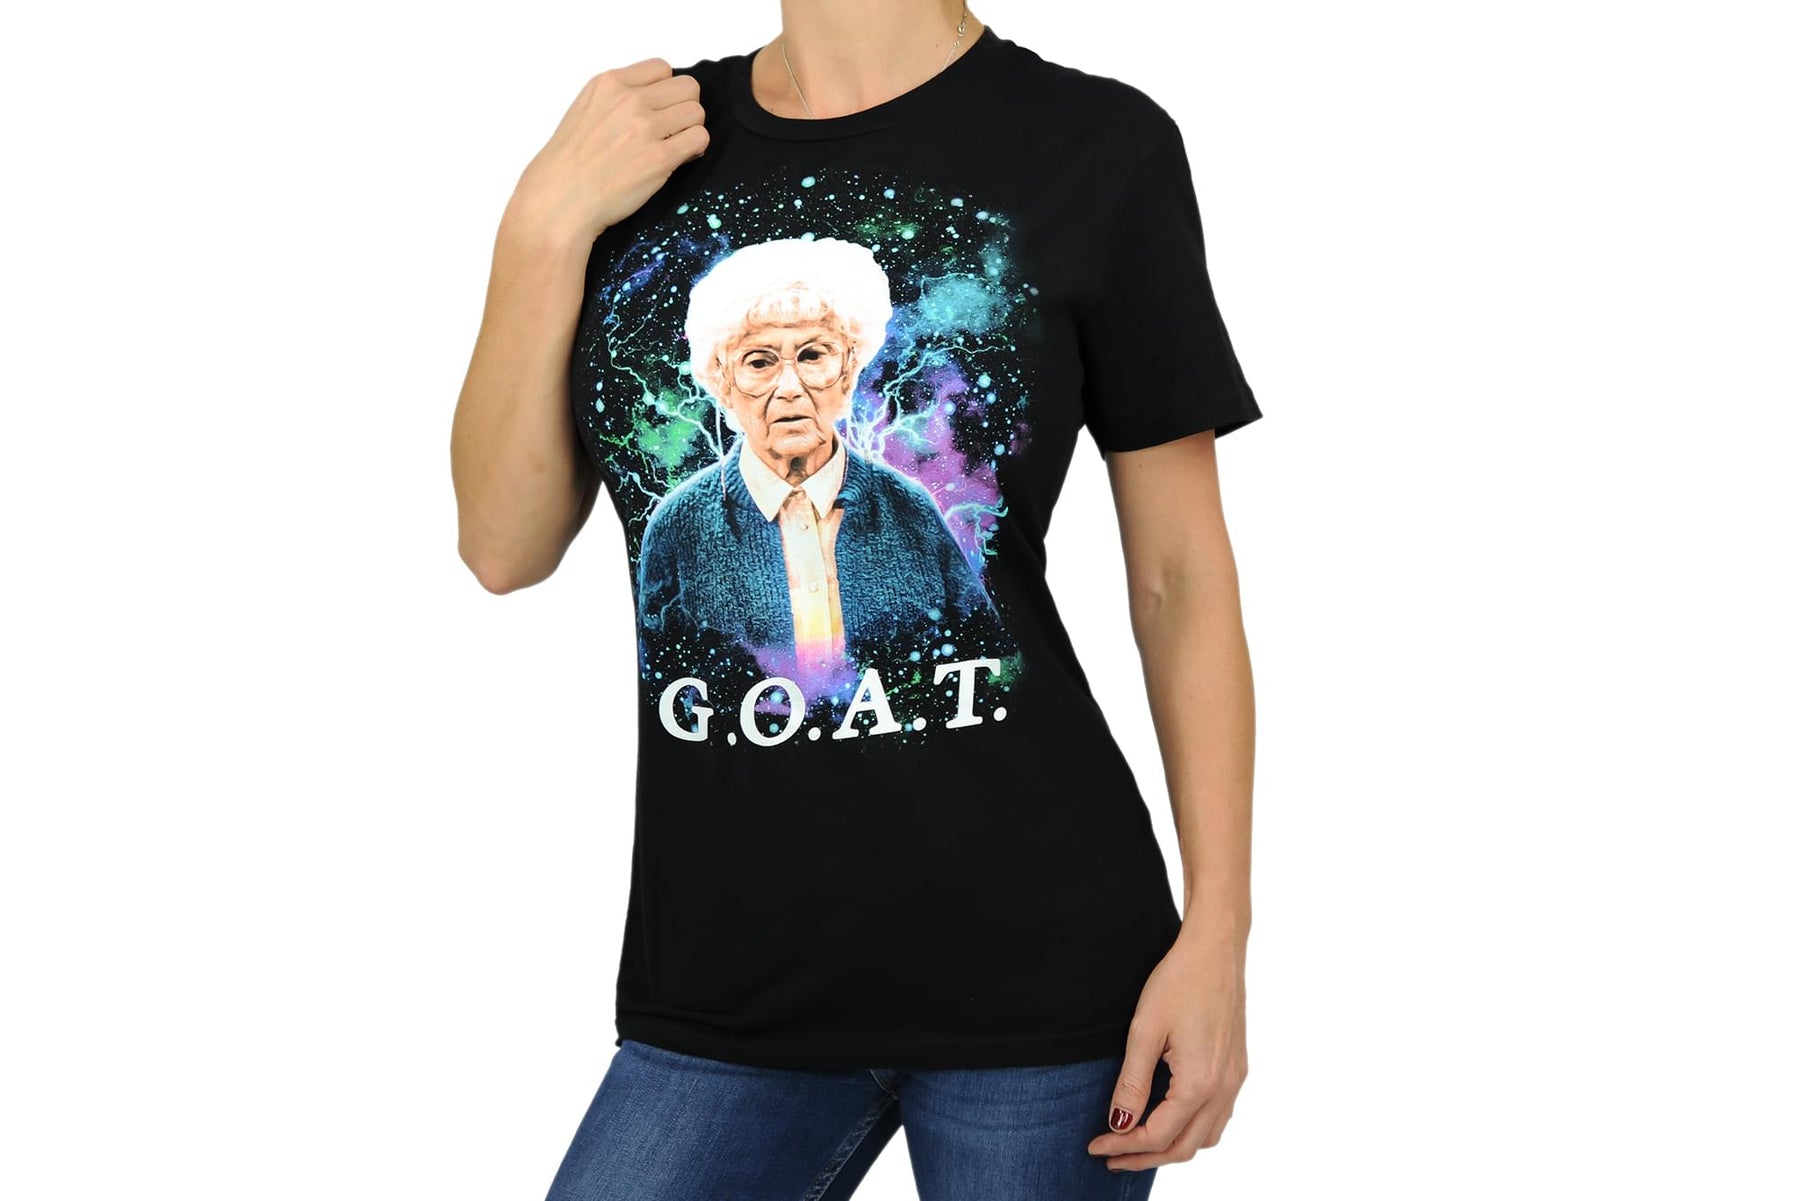 The Golden Girls Exclusive Sophia G.O.A.T Graphic Black T-Shirt